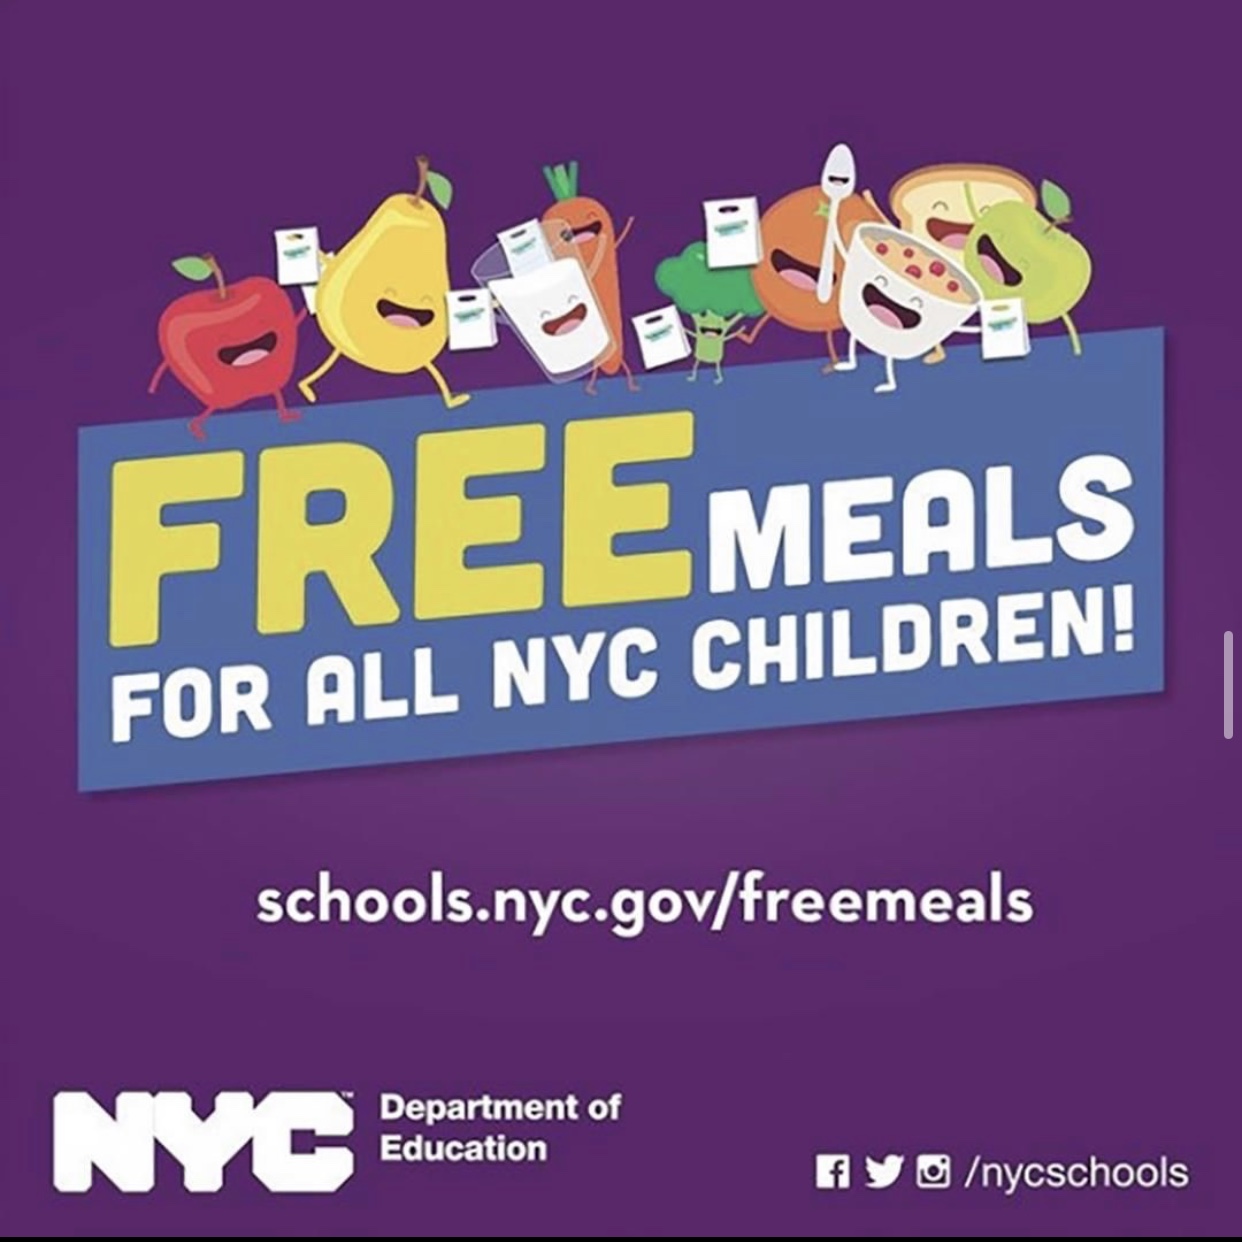 Free meals for all nyc children